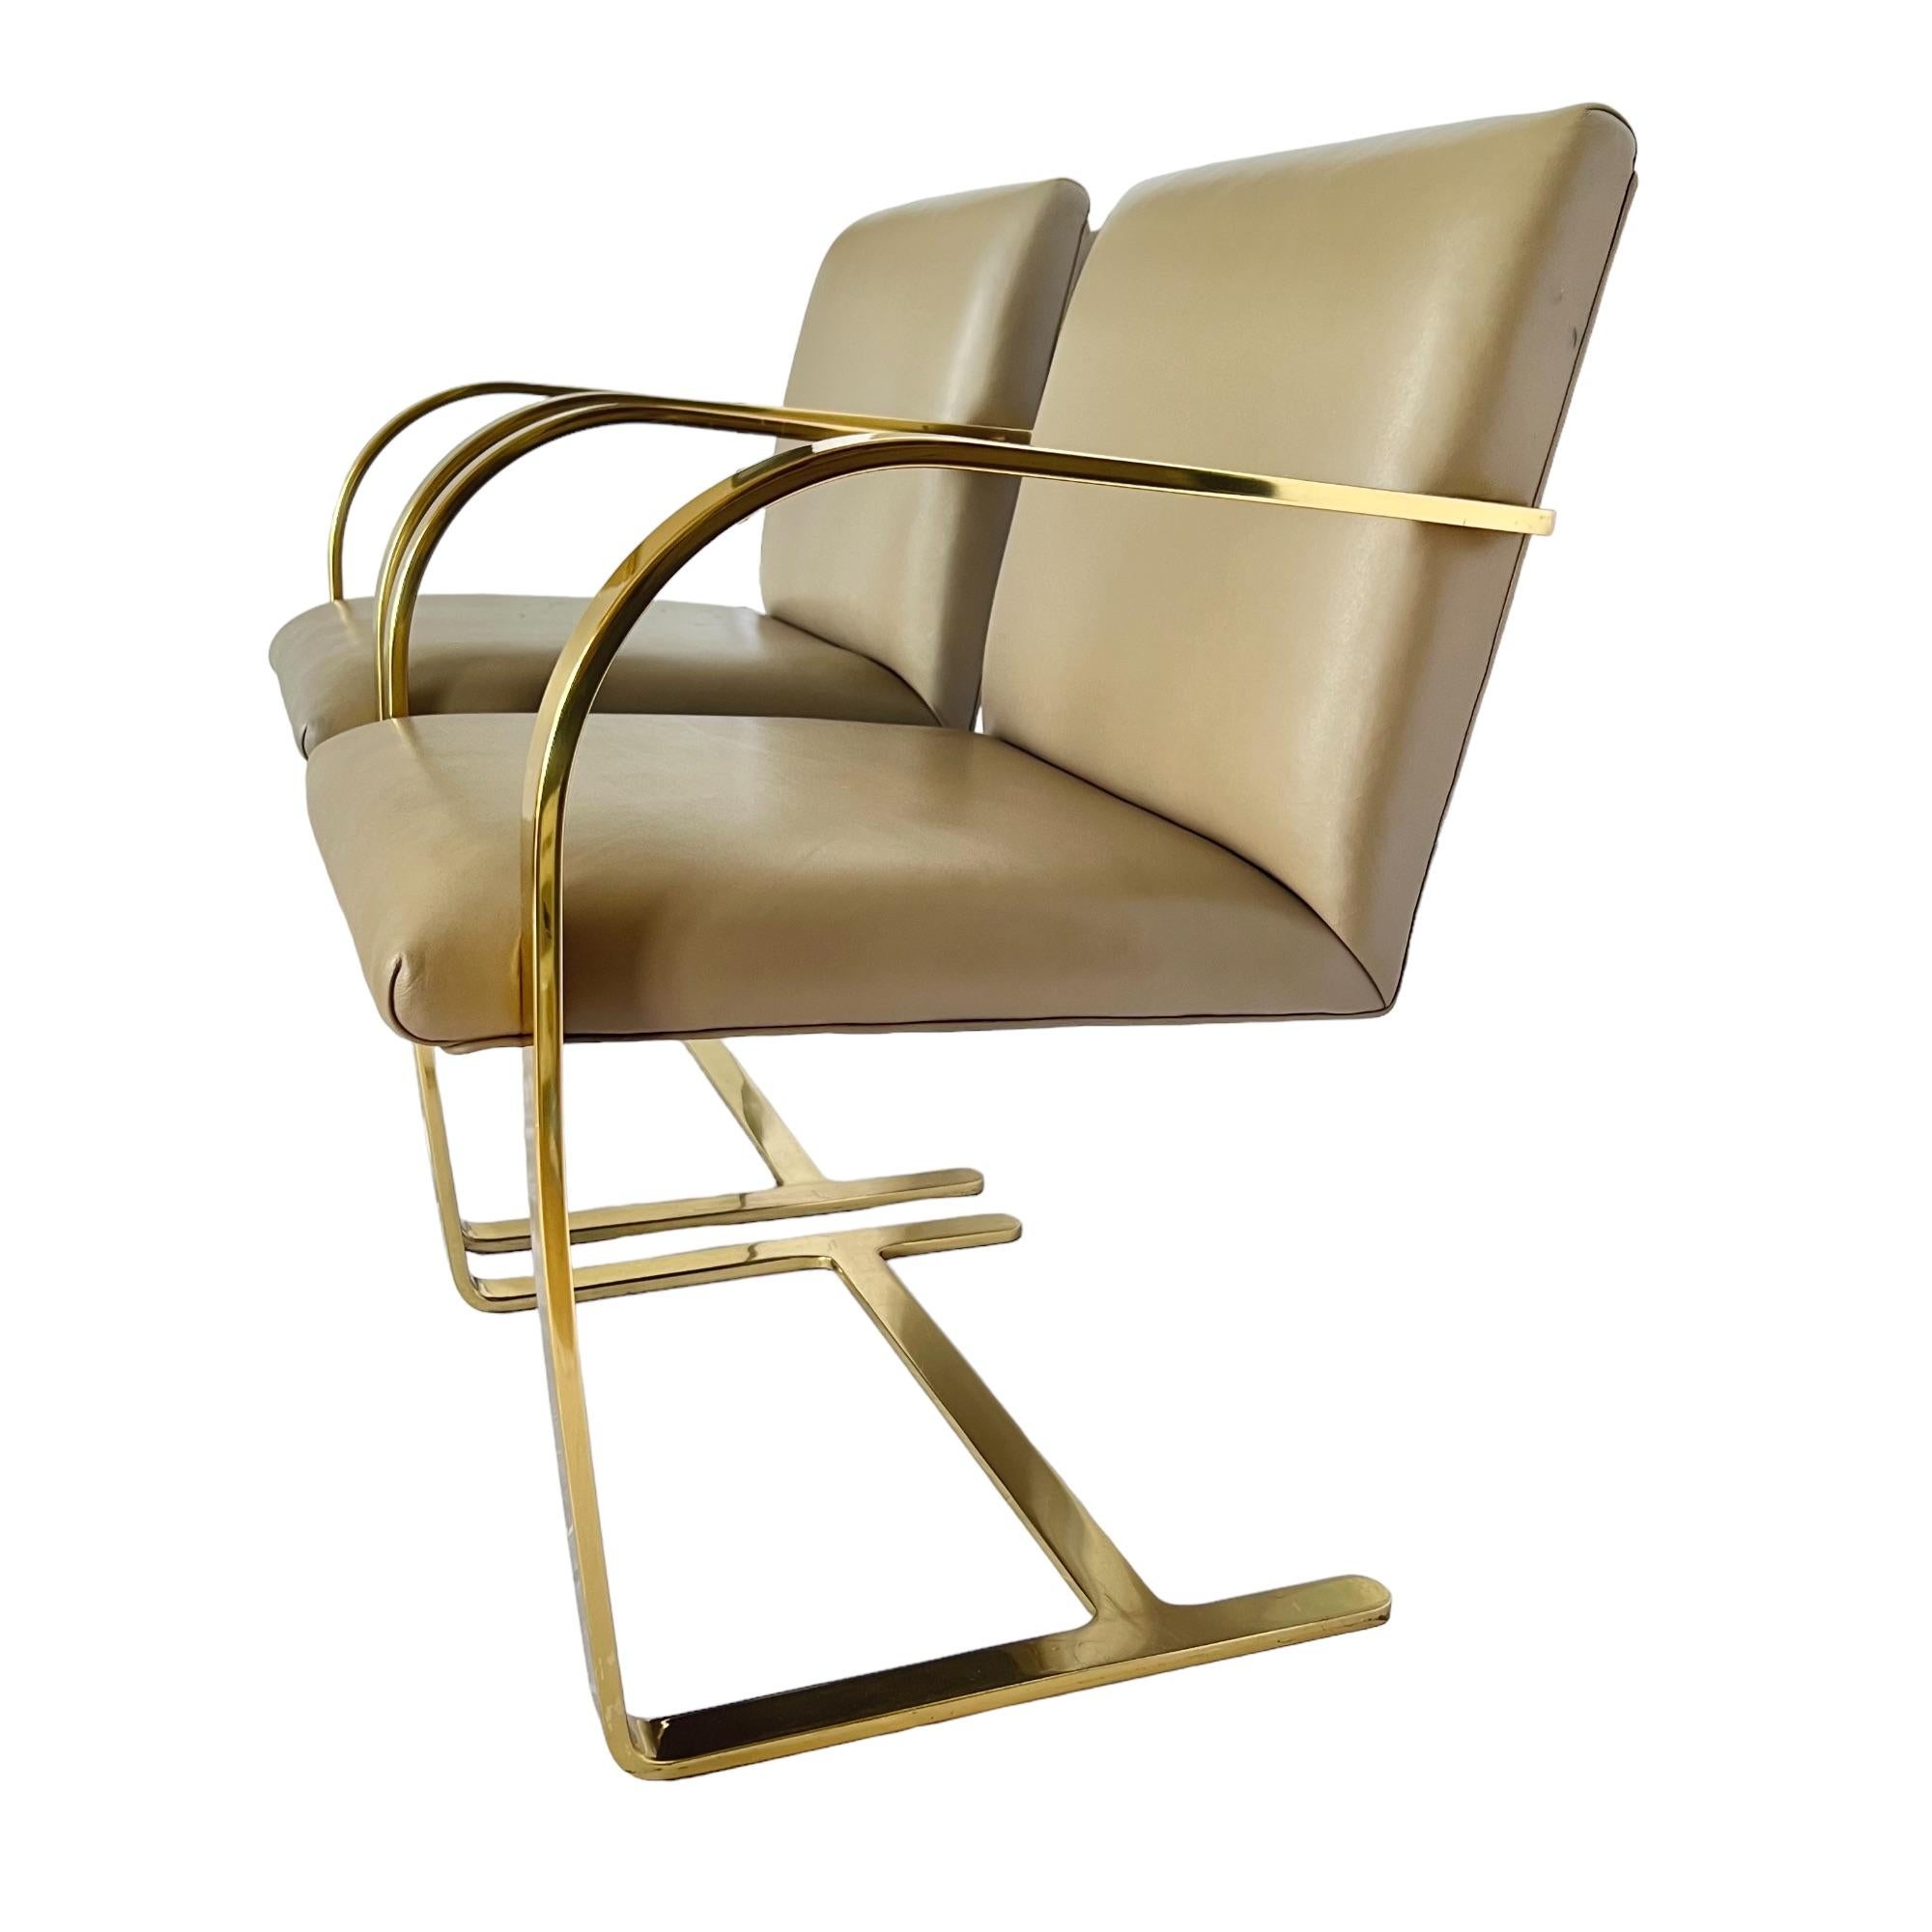 Mid-Century Modern Mies Van Der Rohe Brno Gold Brass Flat Bar Leather Chairs, a Pair For Sale